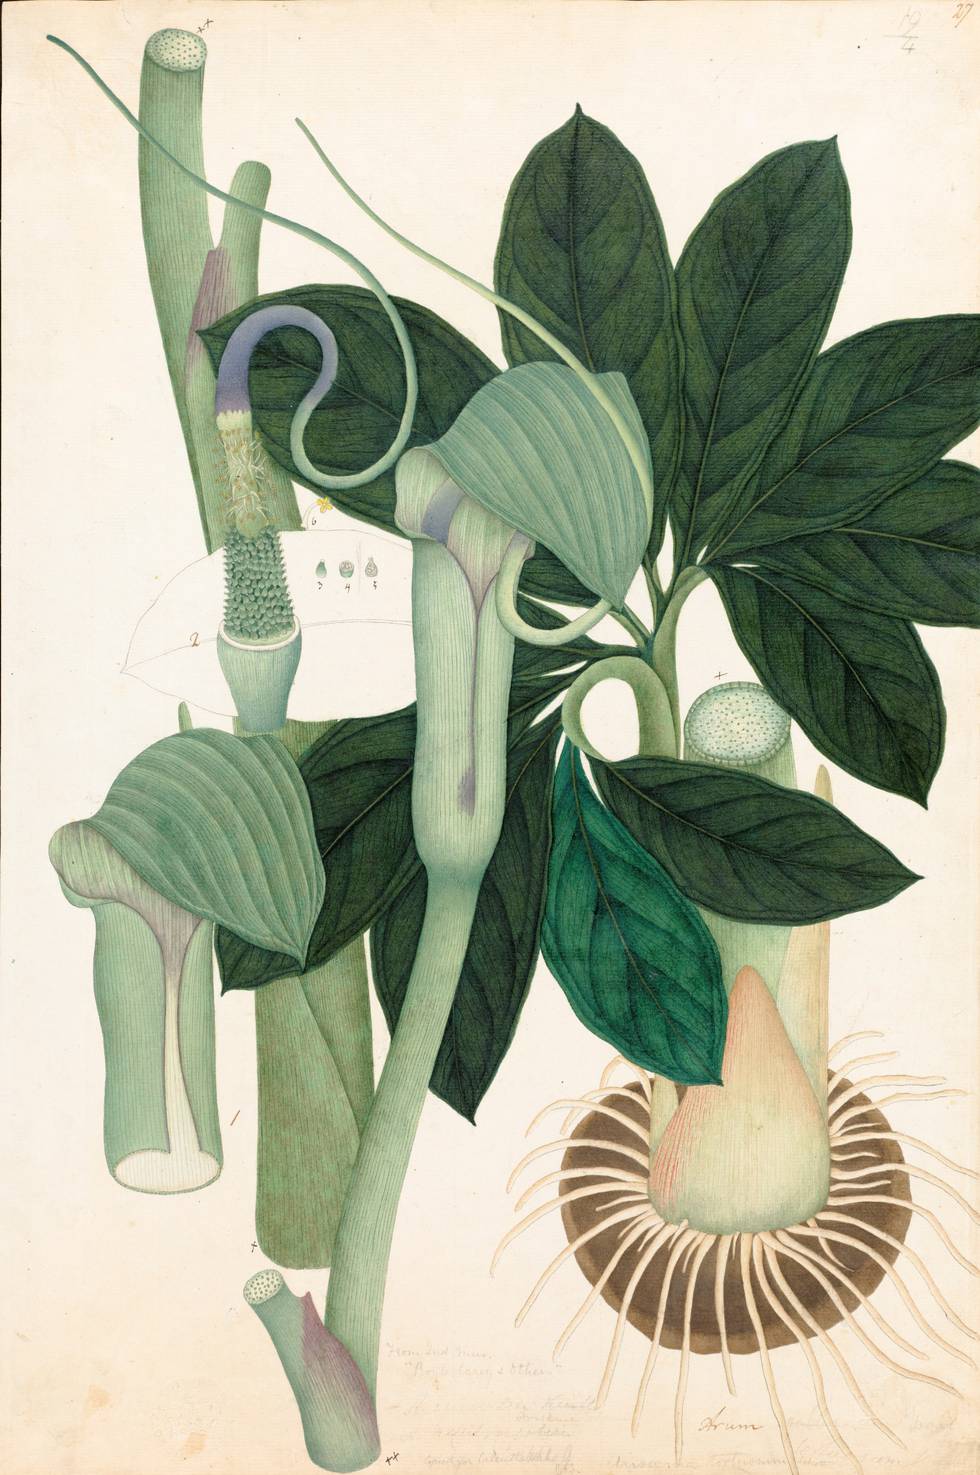 A painting of a plant